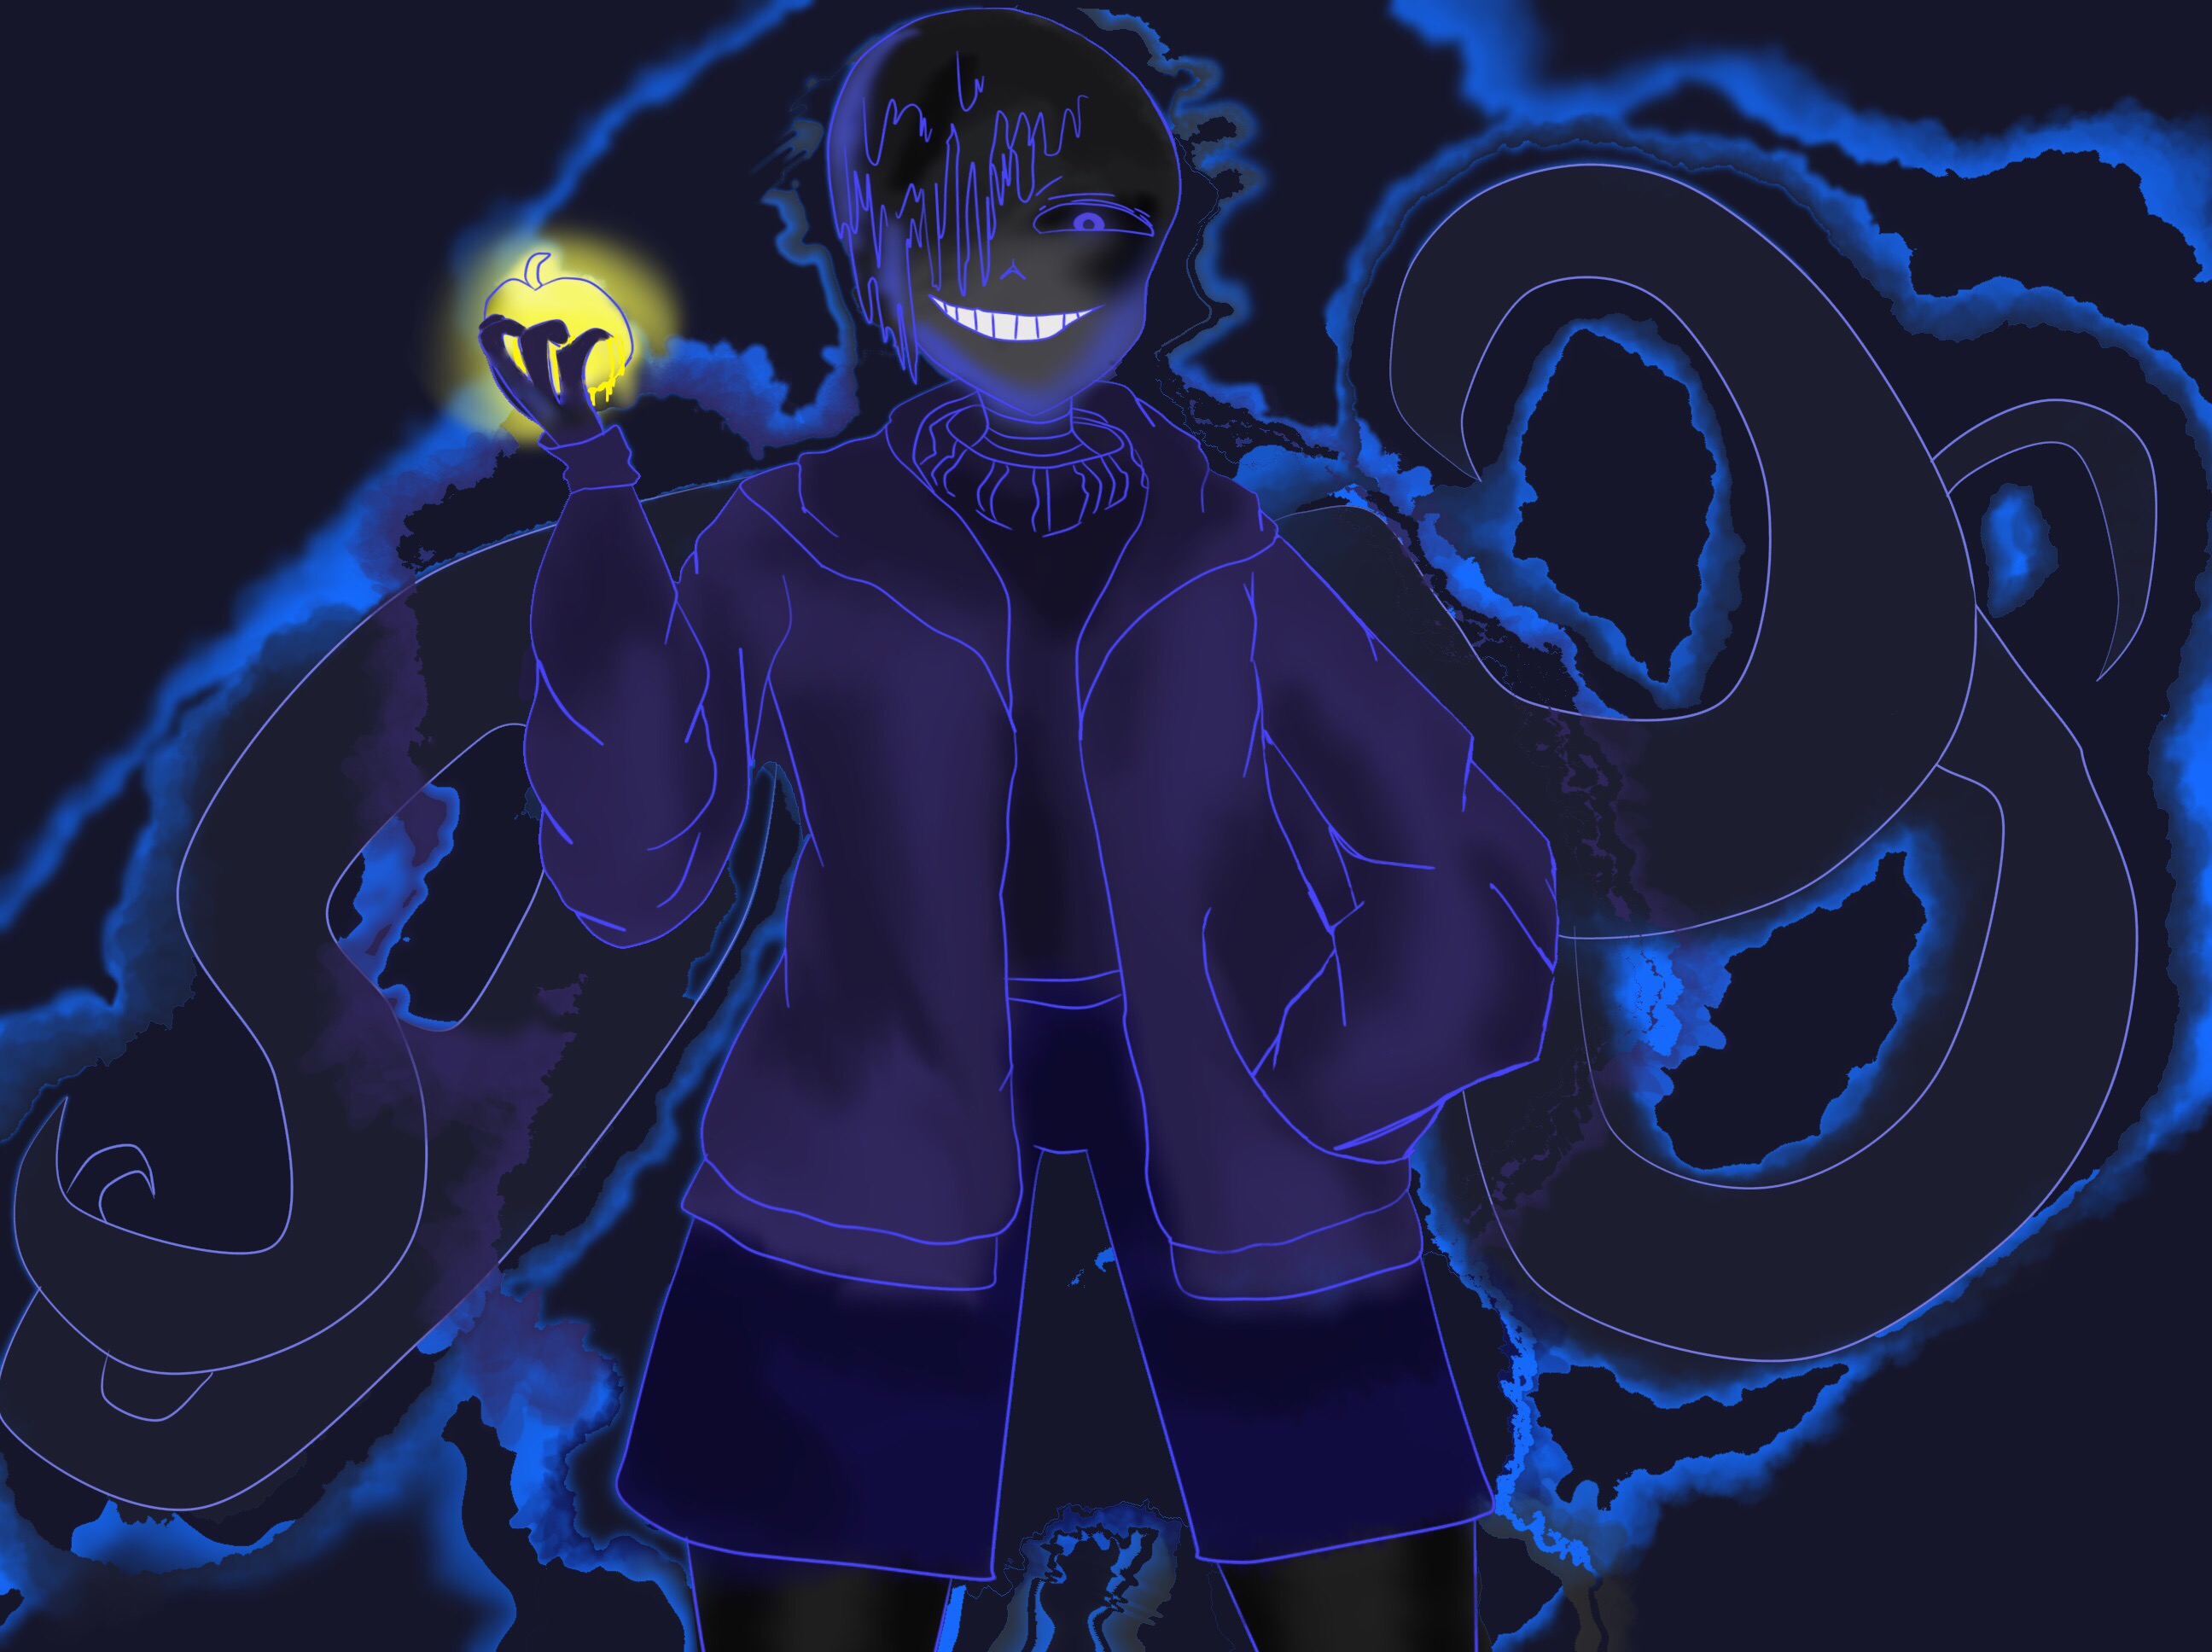 Nightmare Sans - Now thats fan art i never knew i looked